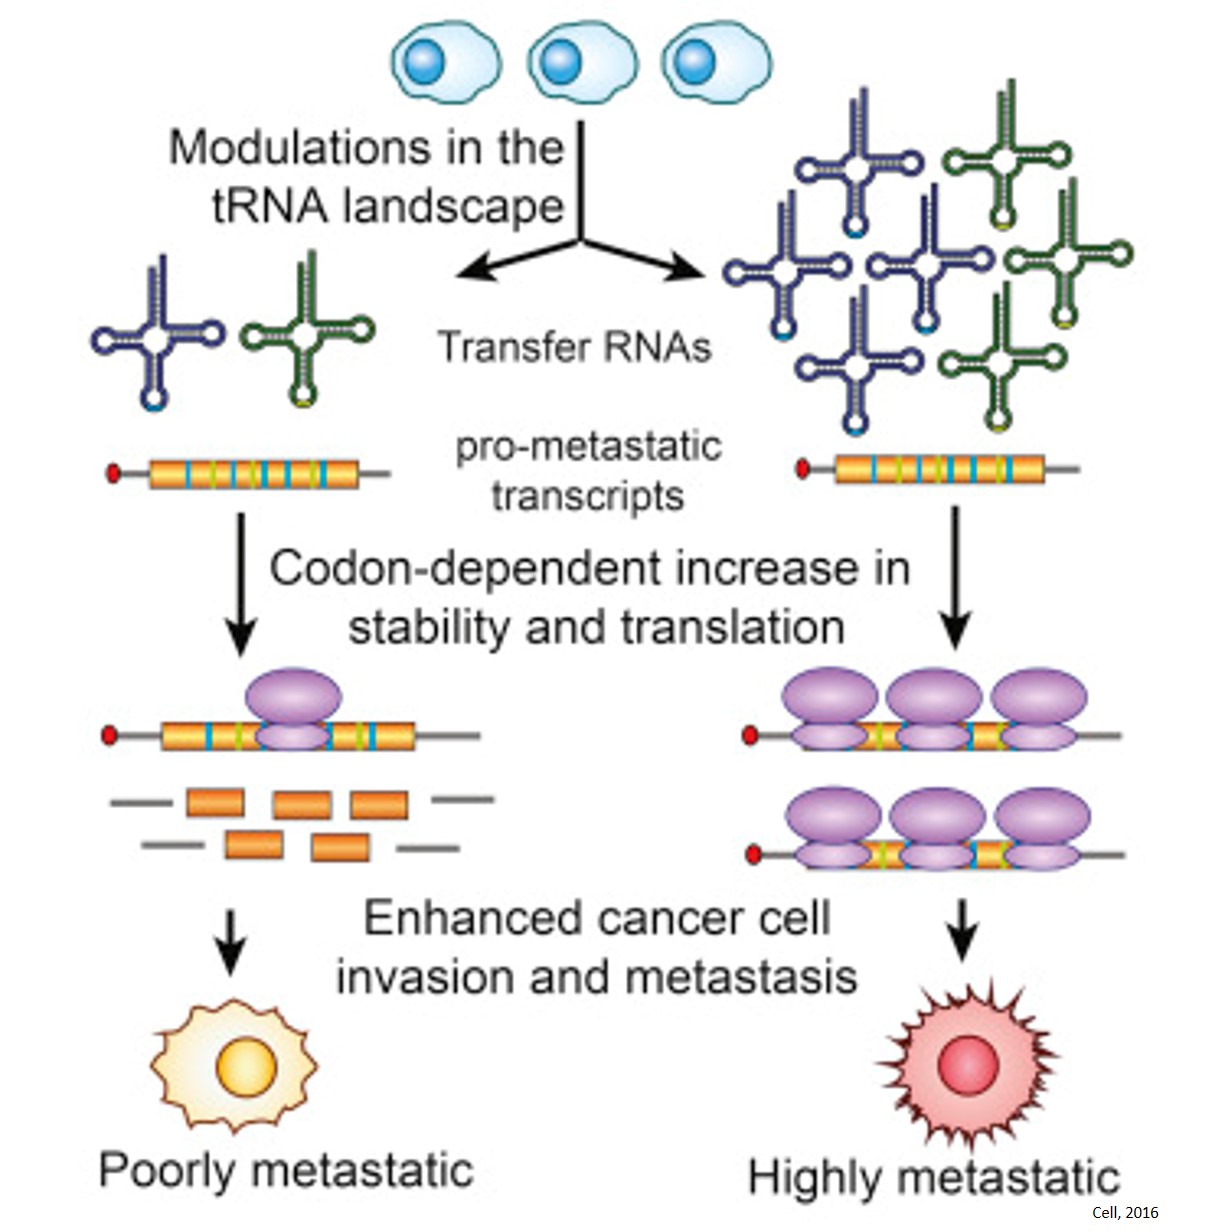 Role of t-RNAs in driving metastatic cancer